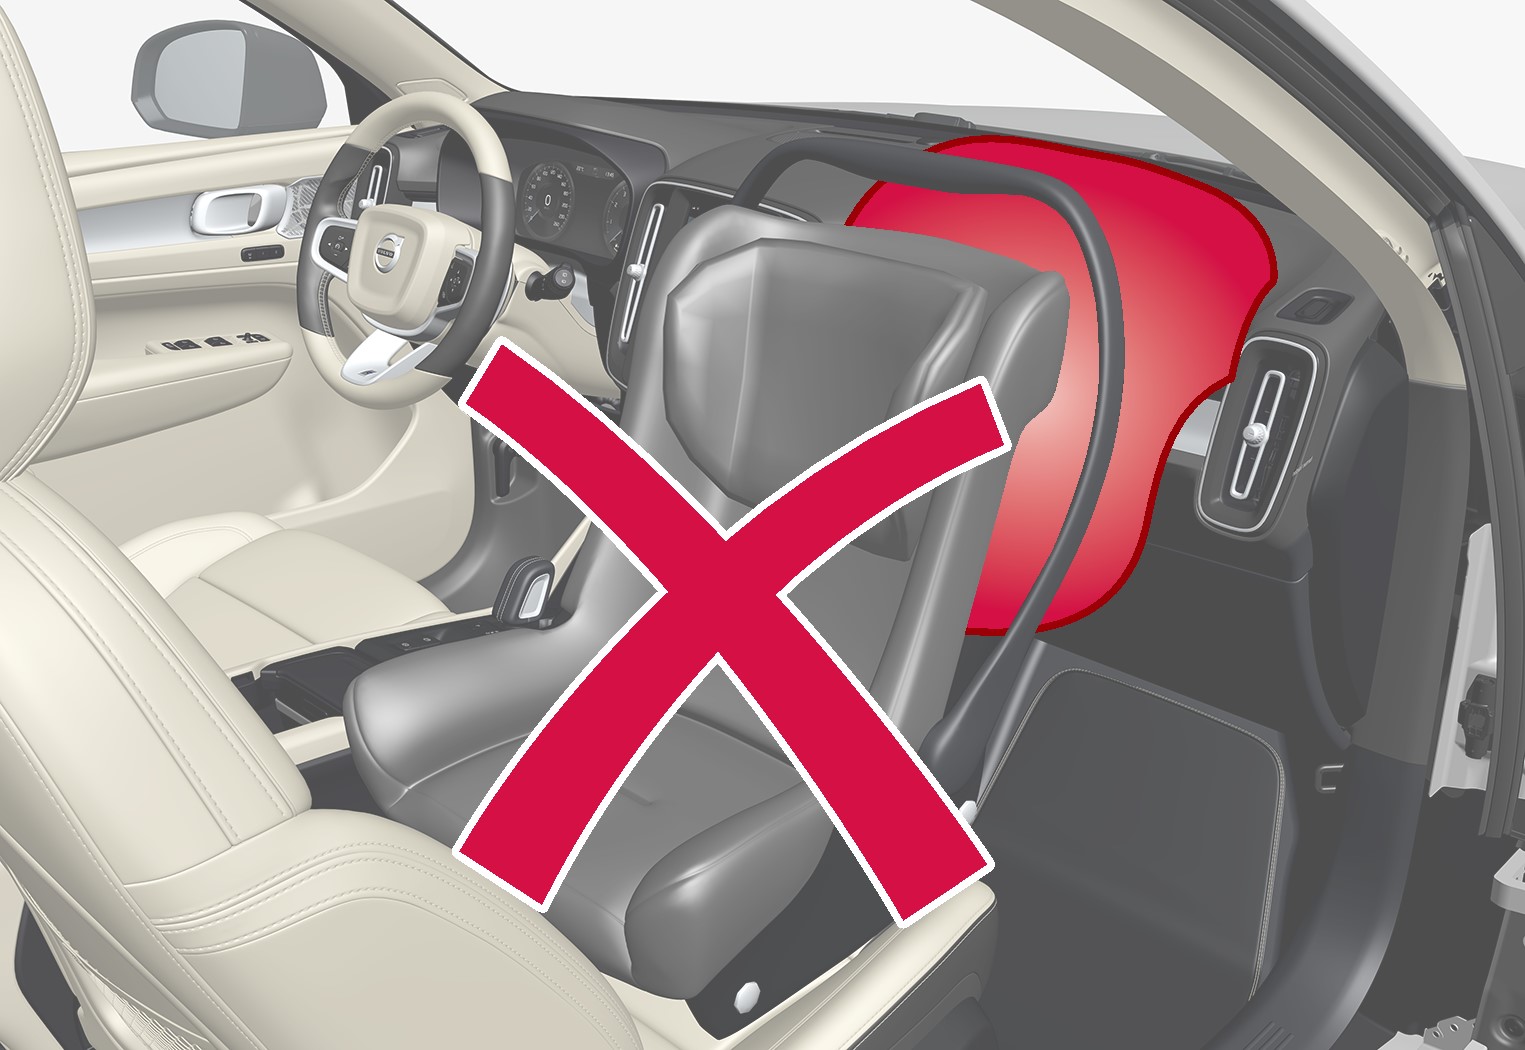 P6-1746-XC40–Safety–Child seat and airbag